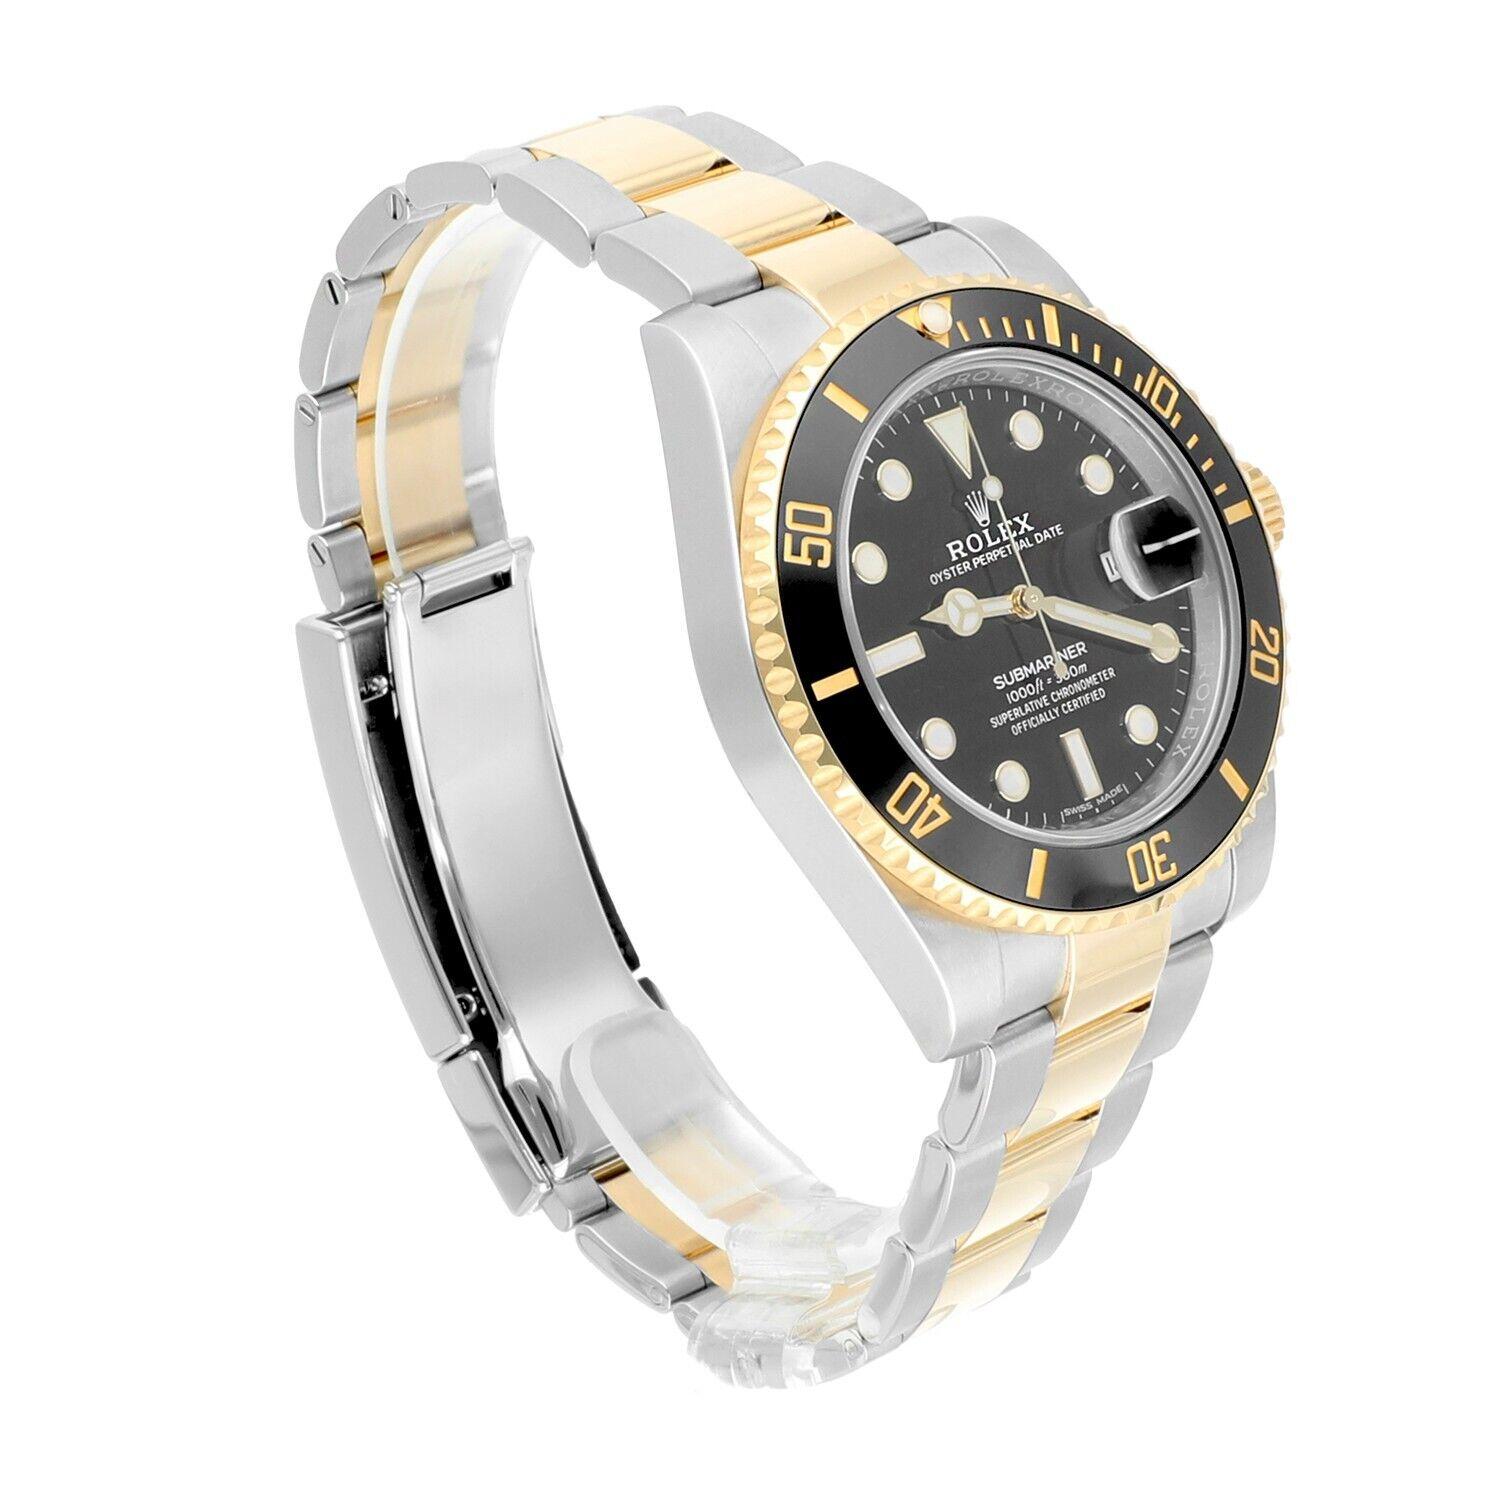 Rolex Submariner Date 116613LN Black Dial 18k Gold/Steel Ceramic Complete Watch For Sale 2